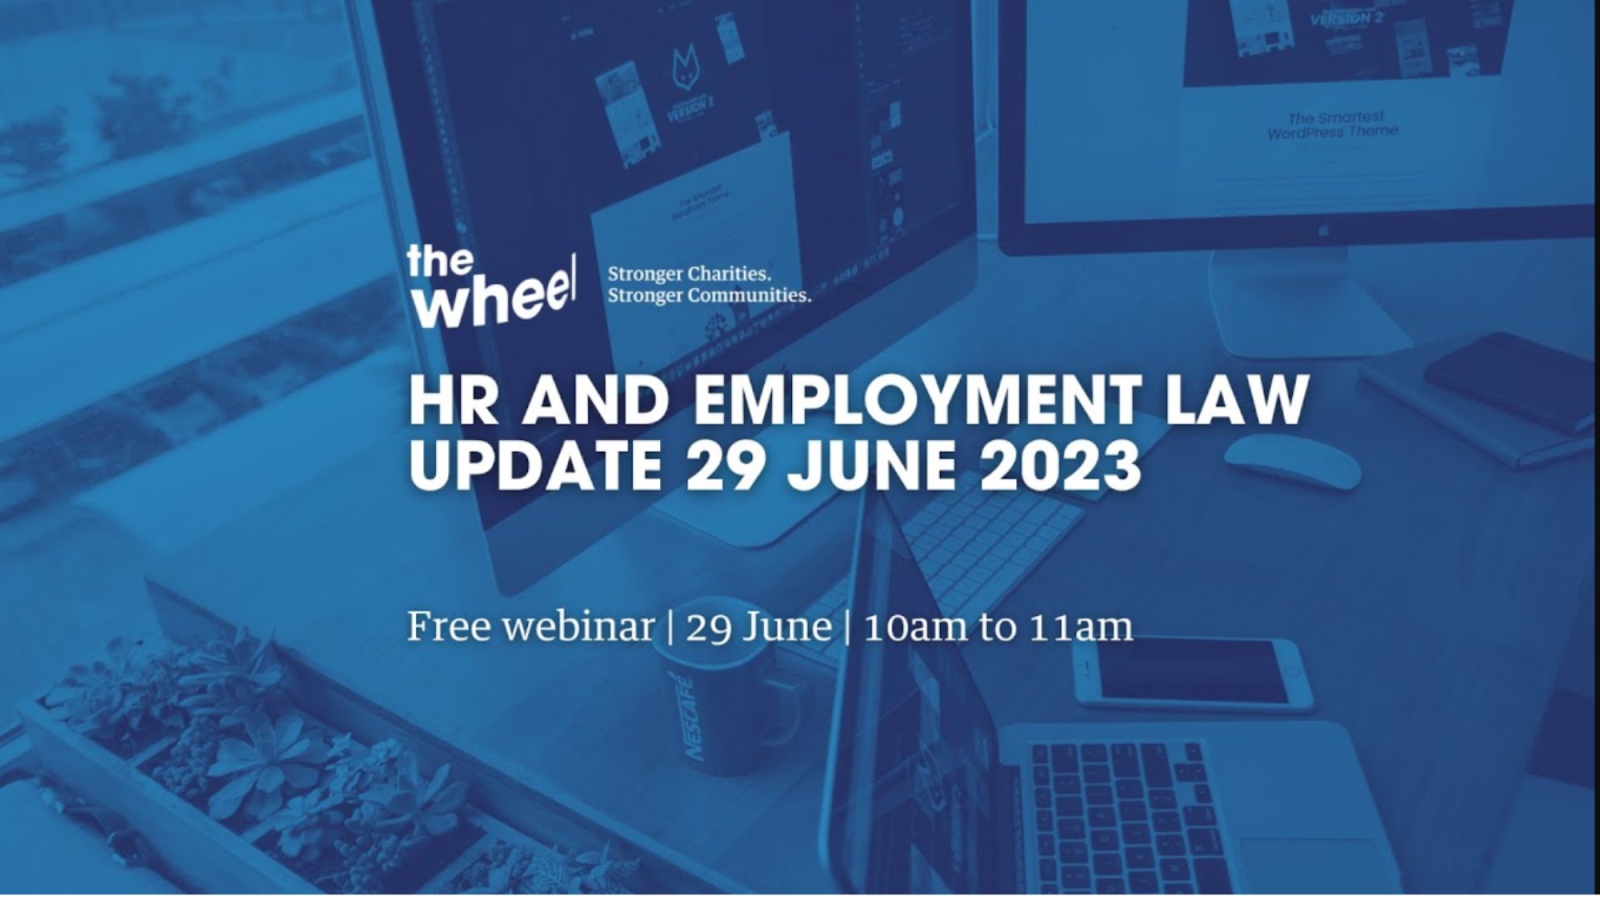 HR and Employment Law Update 29 June 2023